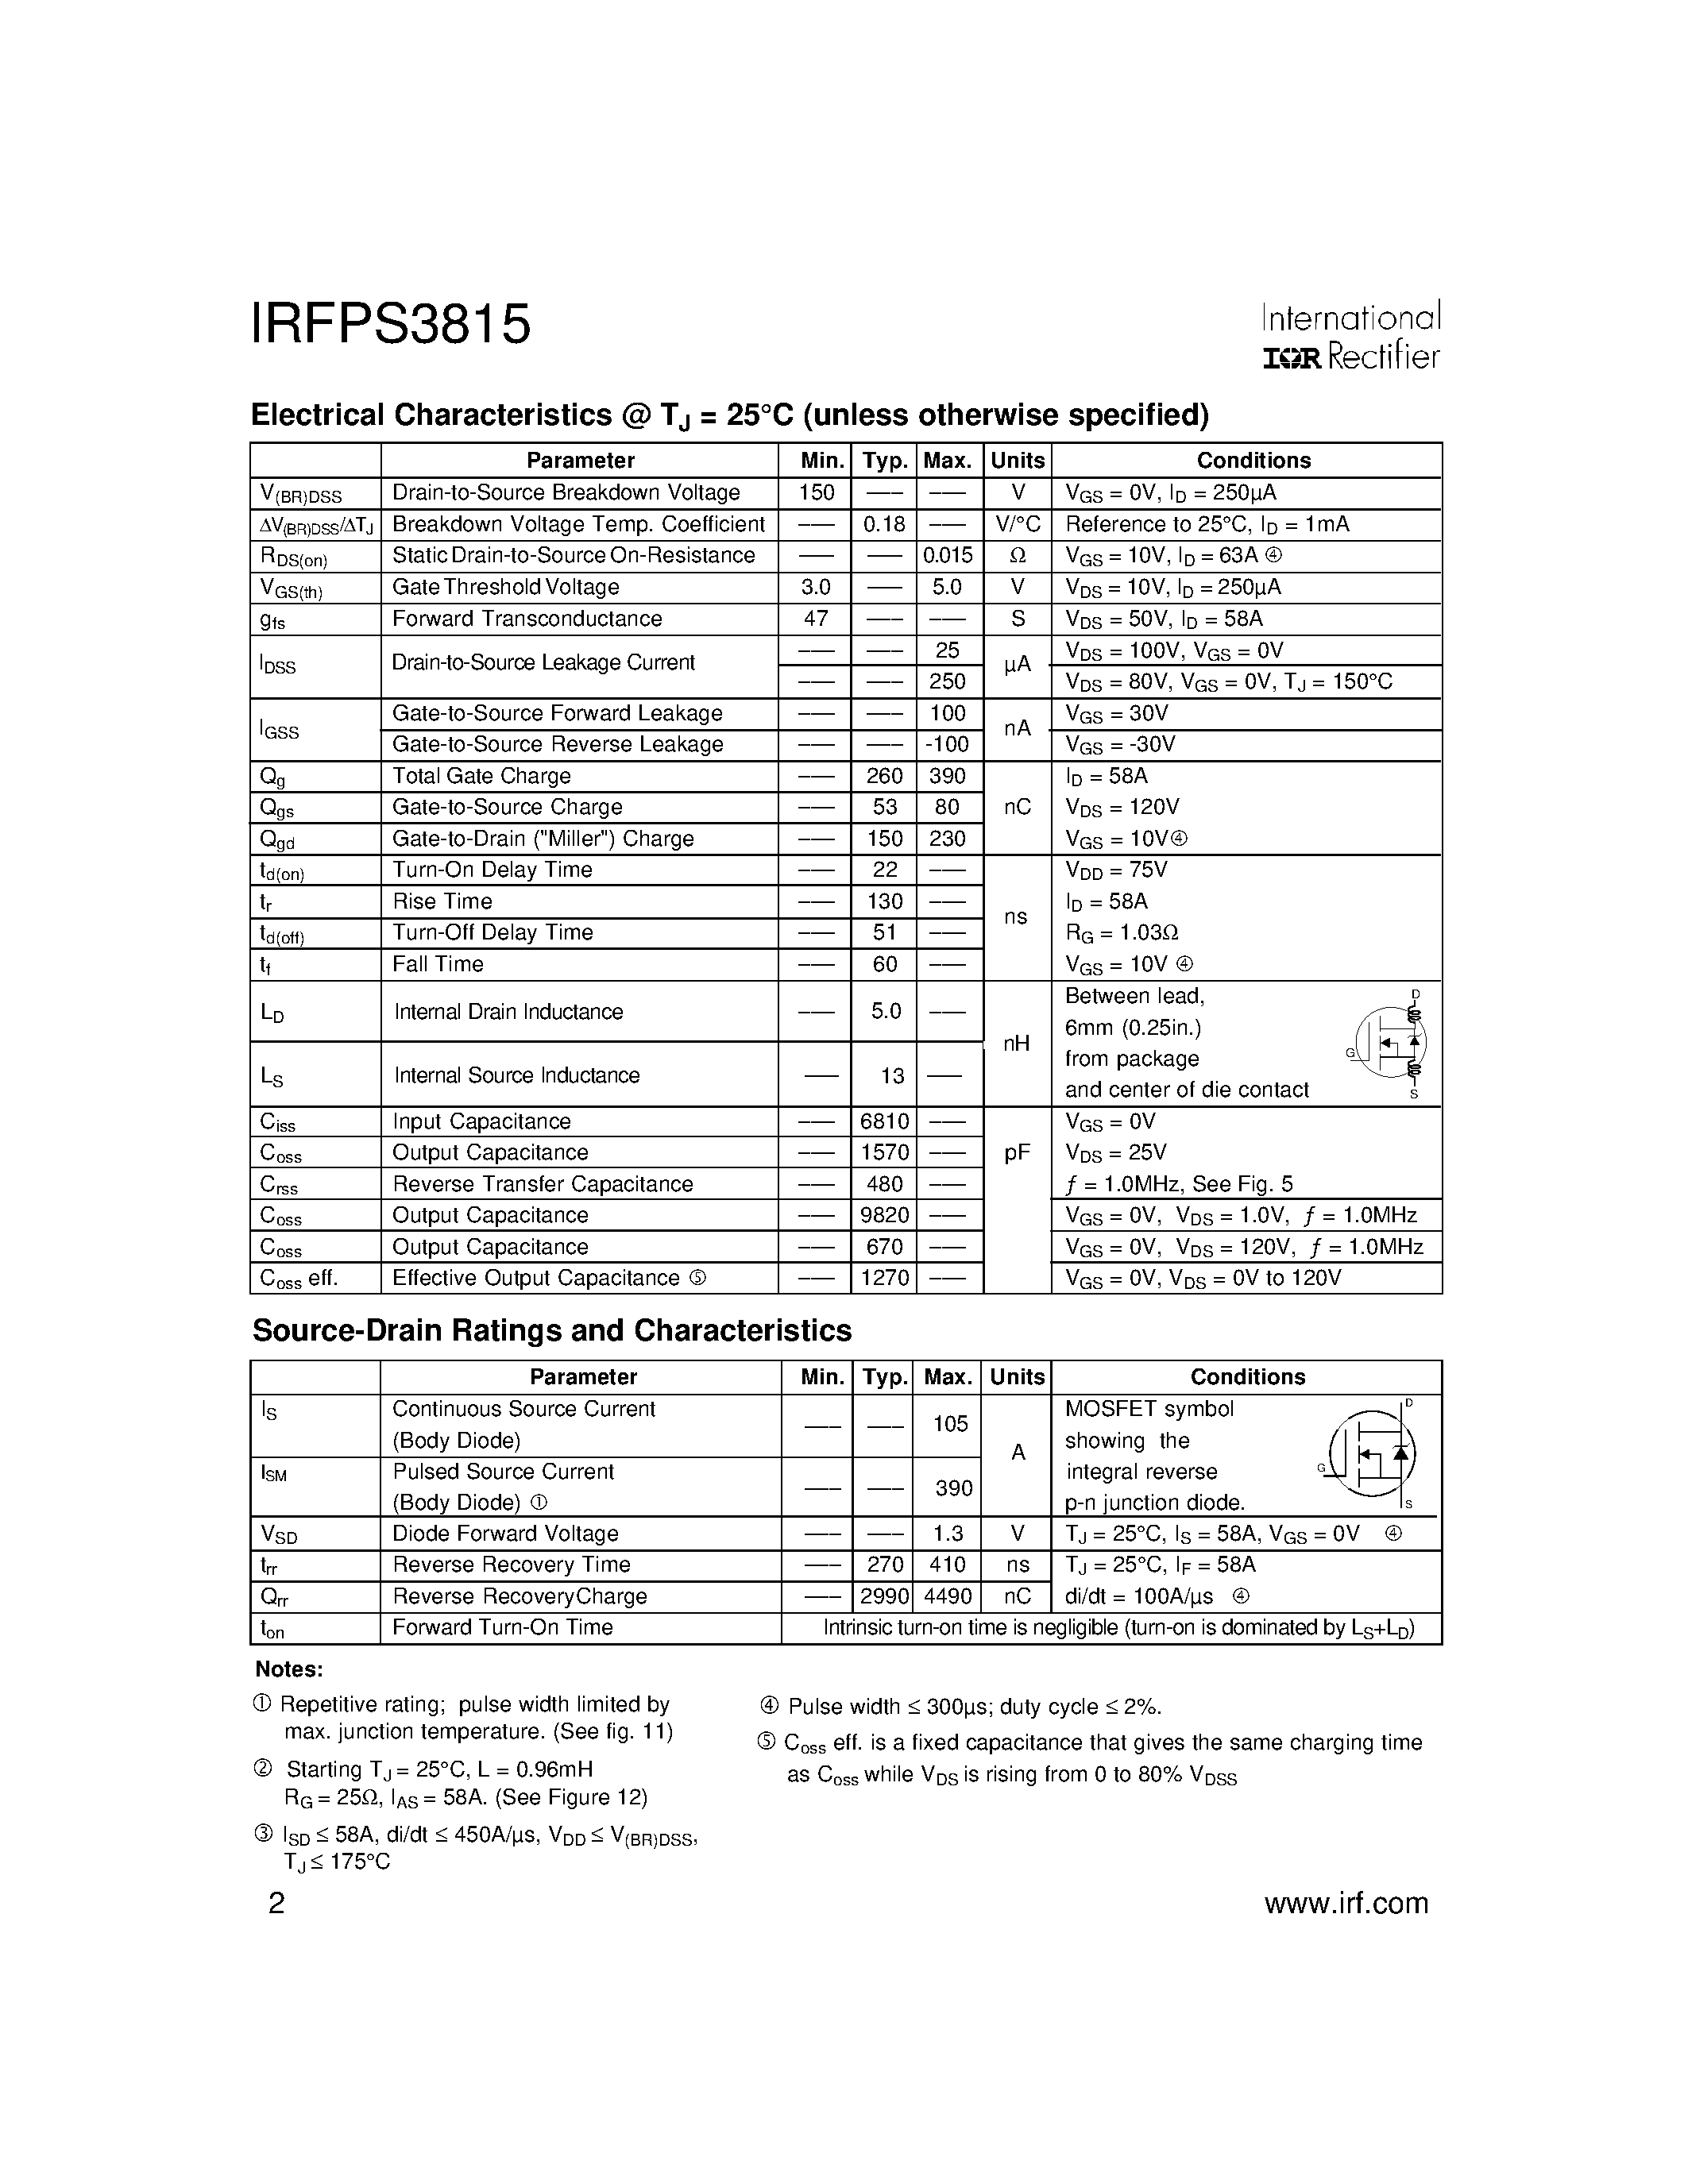 Datasheet IRFPS3815 - HEXFET Power MOSFET page 2